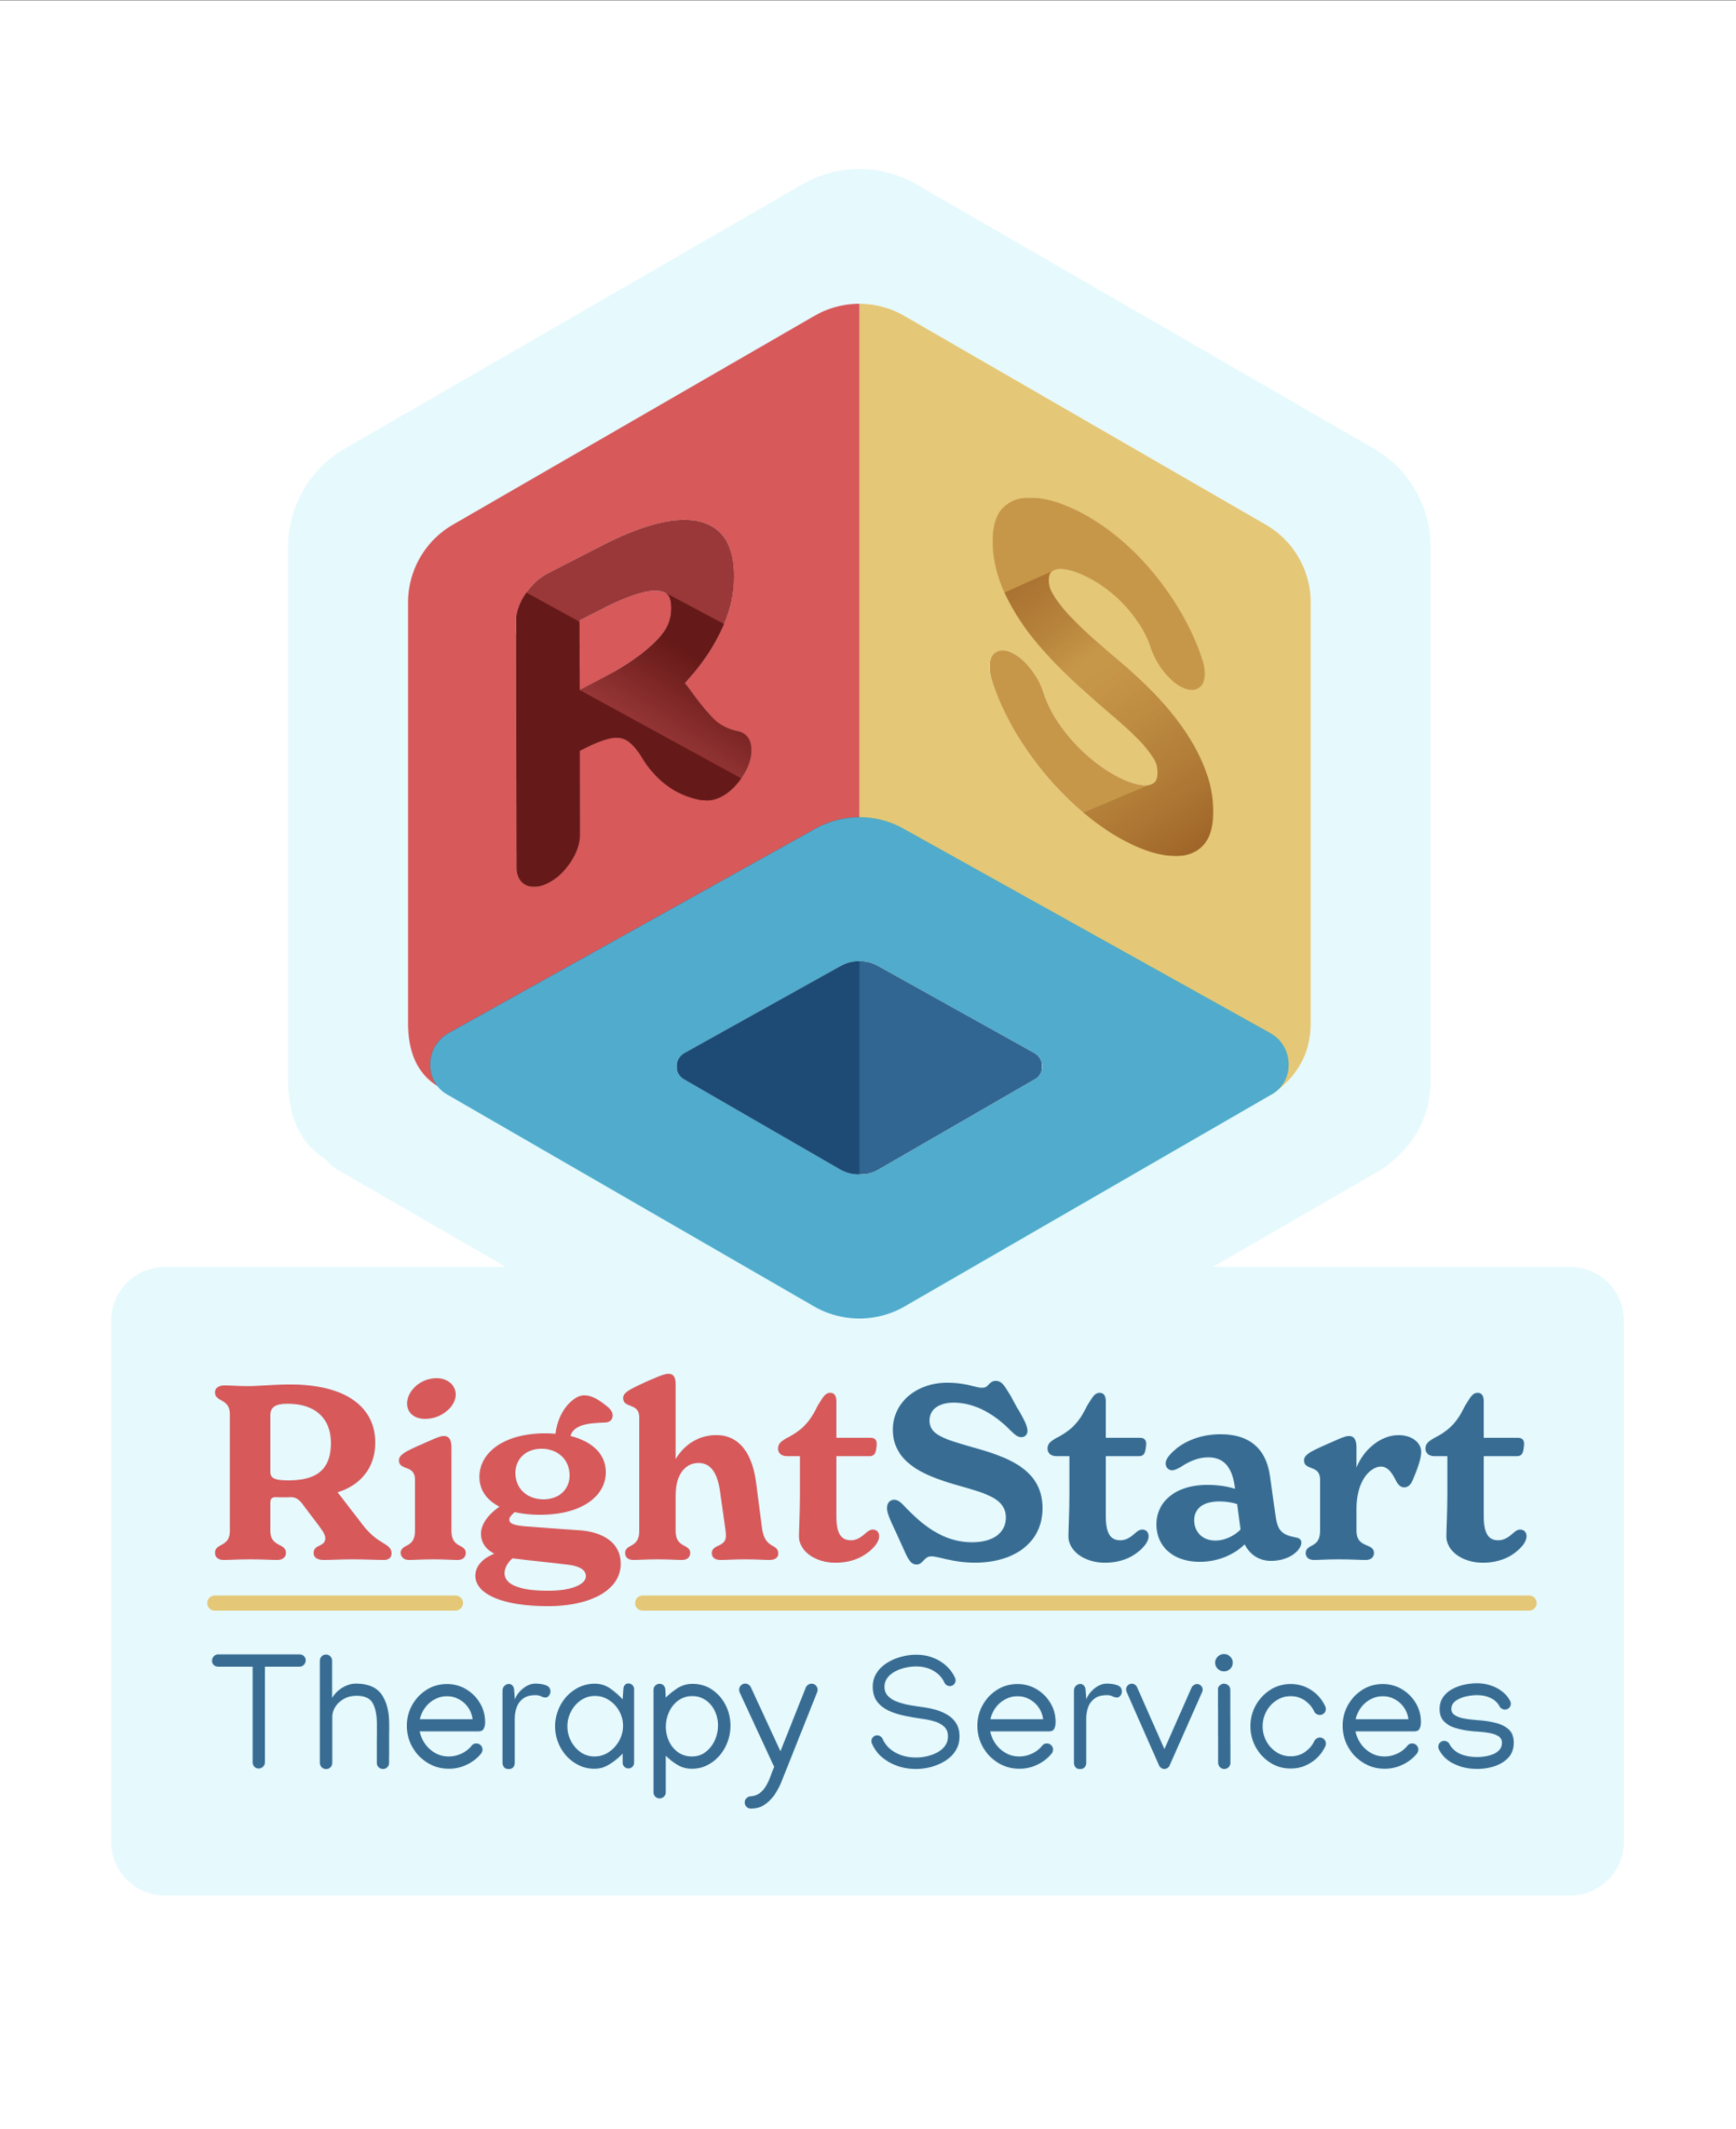 RightStart Therapy Services